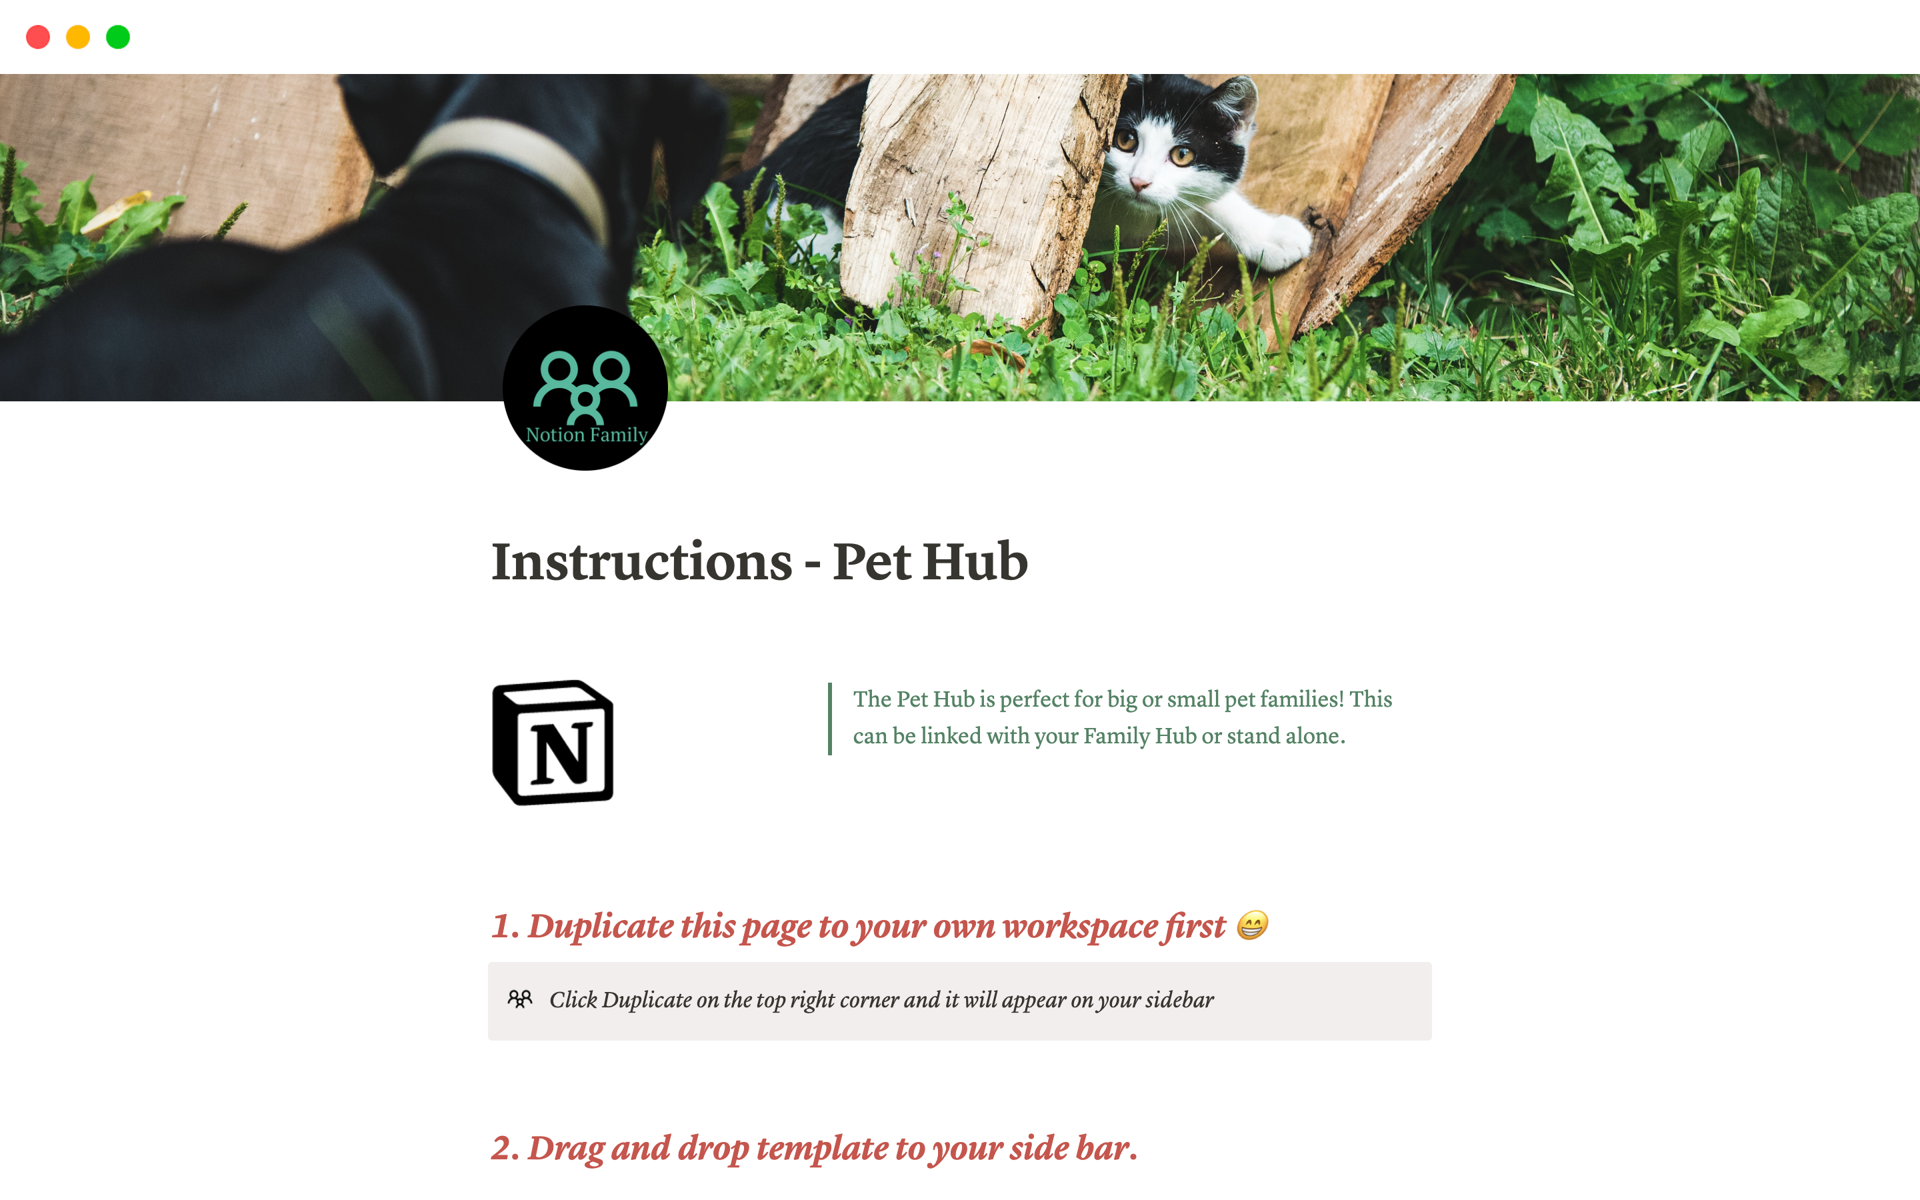 For big or small pet families to track it all!